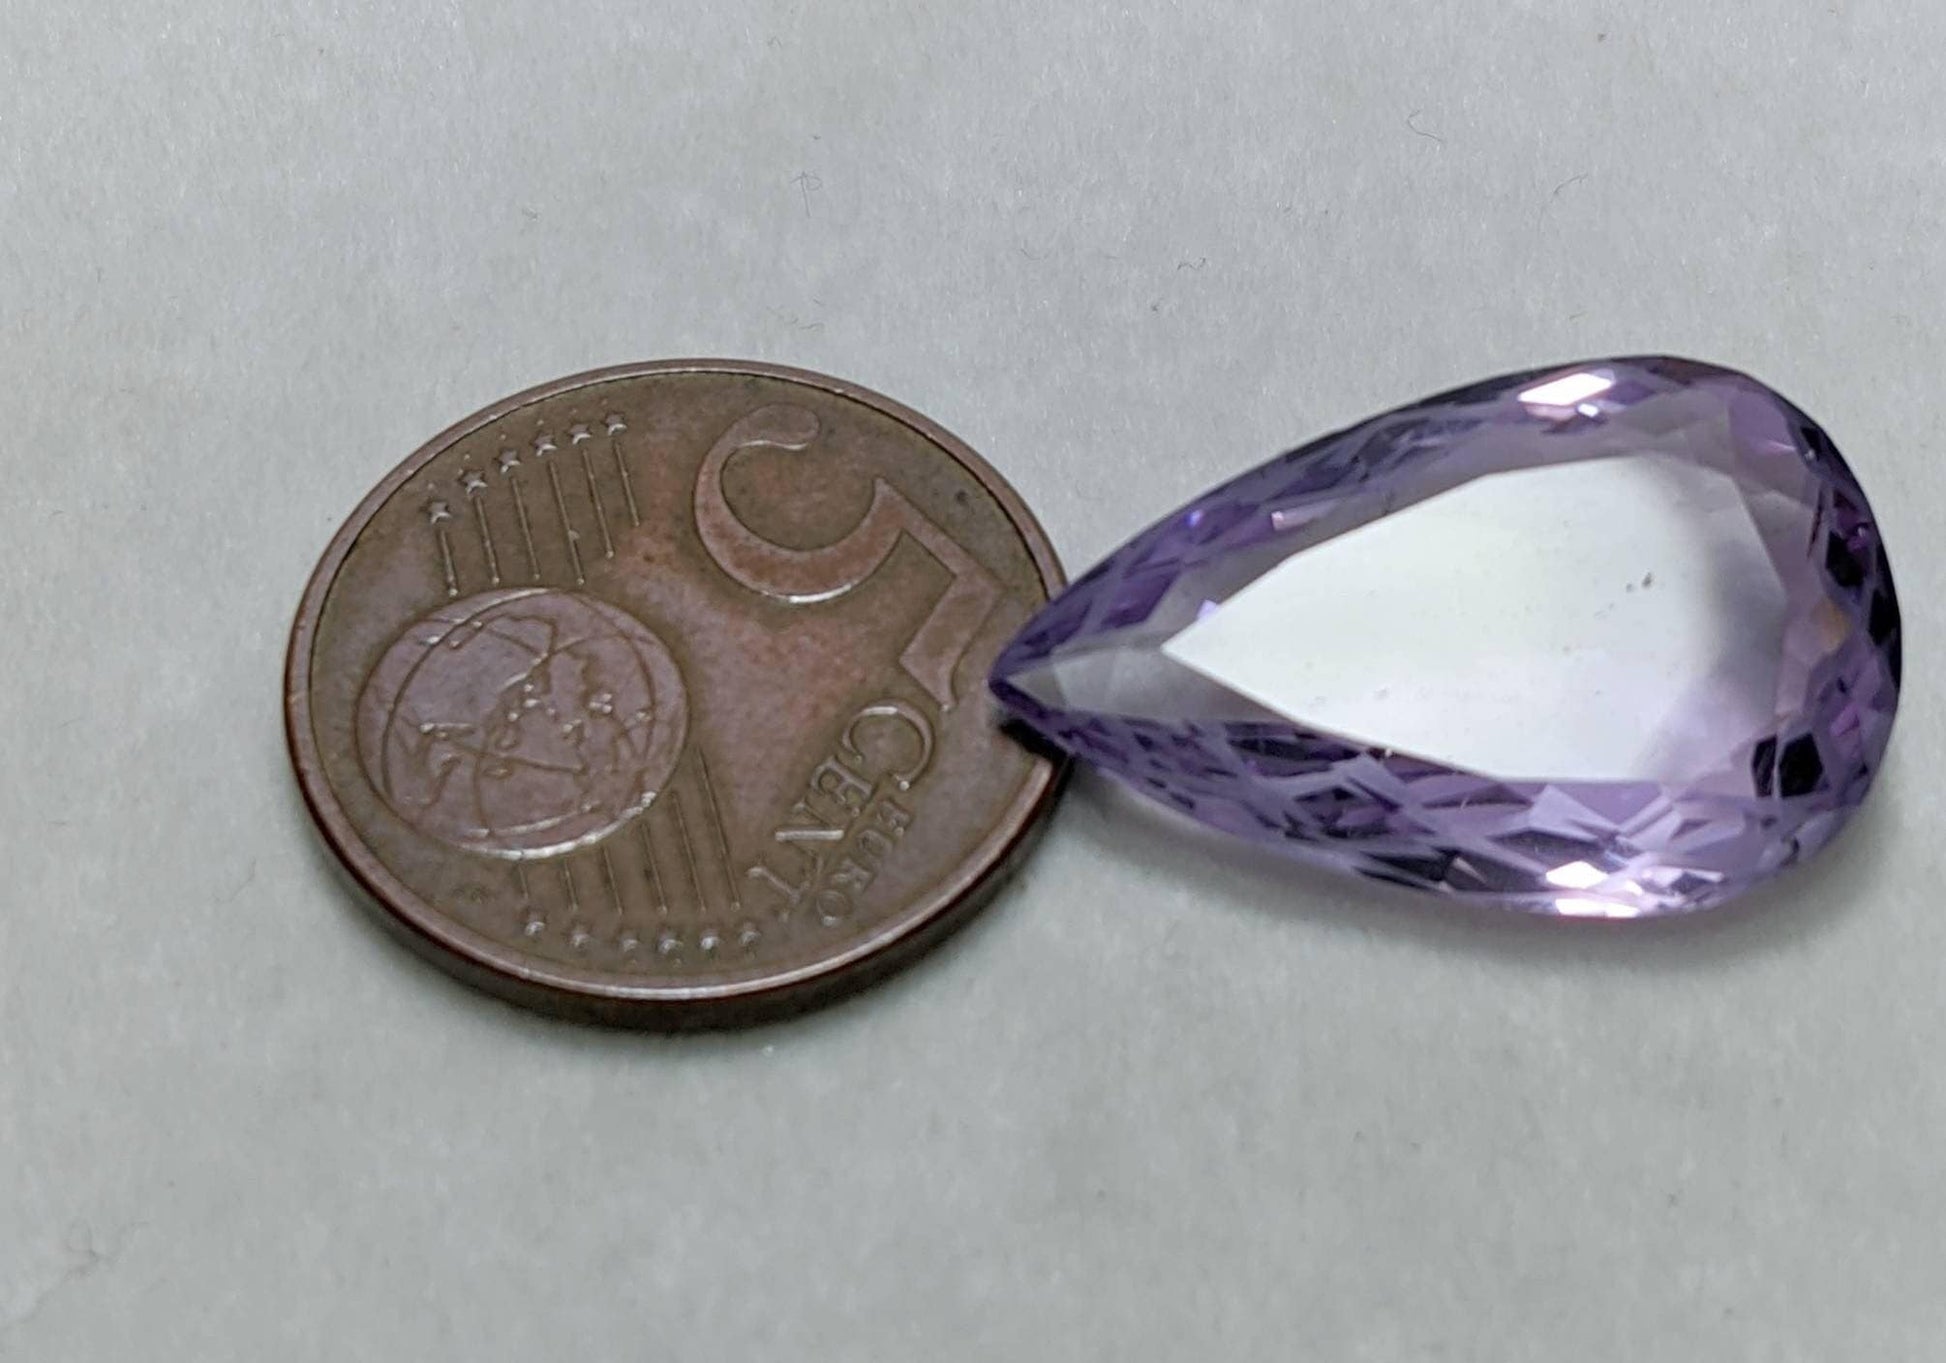 ARSAA GEMS AND MINERALSNatural fine quality beautiful 15 carats light purple color clear faceted amethyst gem - Premium  from ARSAA GEMS AND MINERALS - Just $15.00! Shop now at ARSAA GEMS AND MINERALS